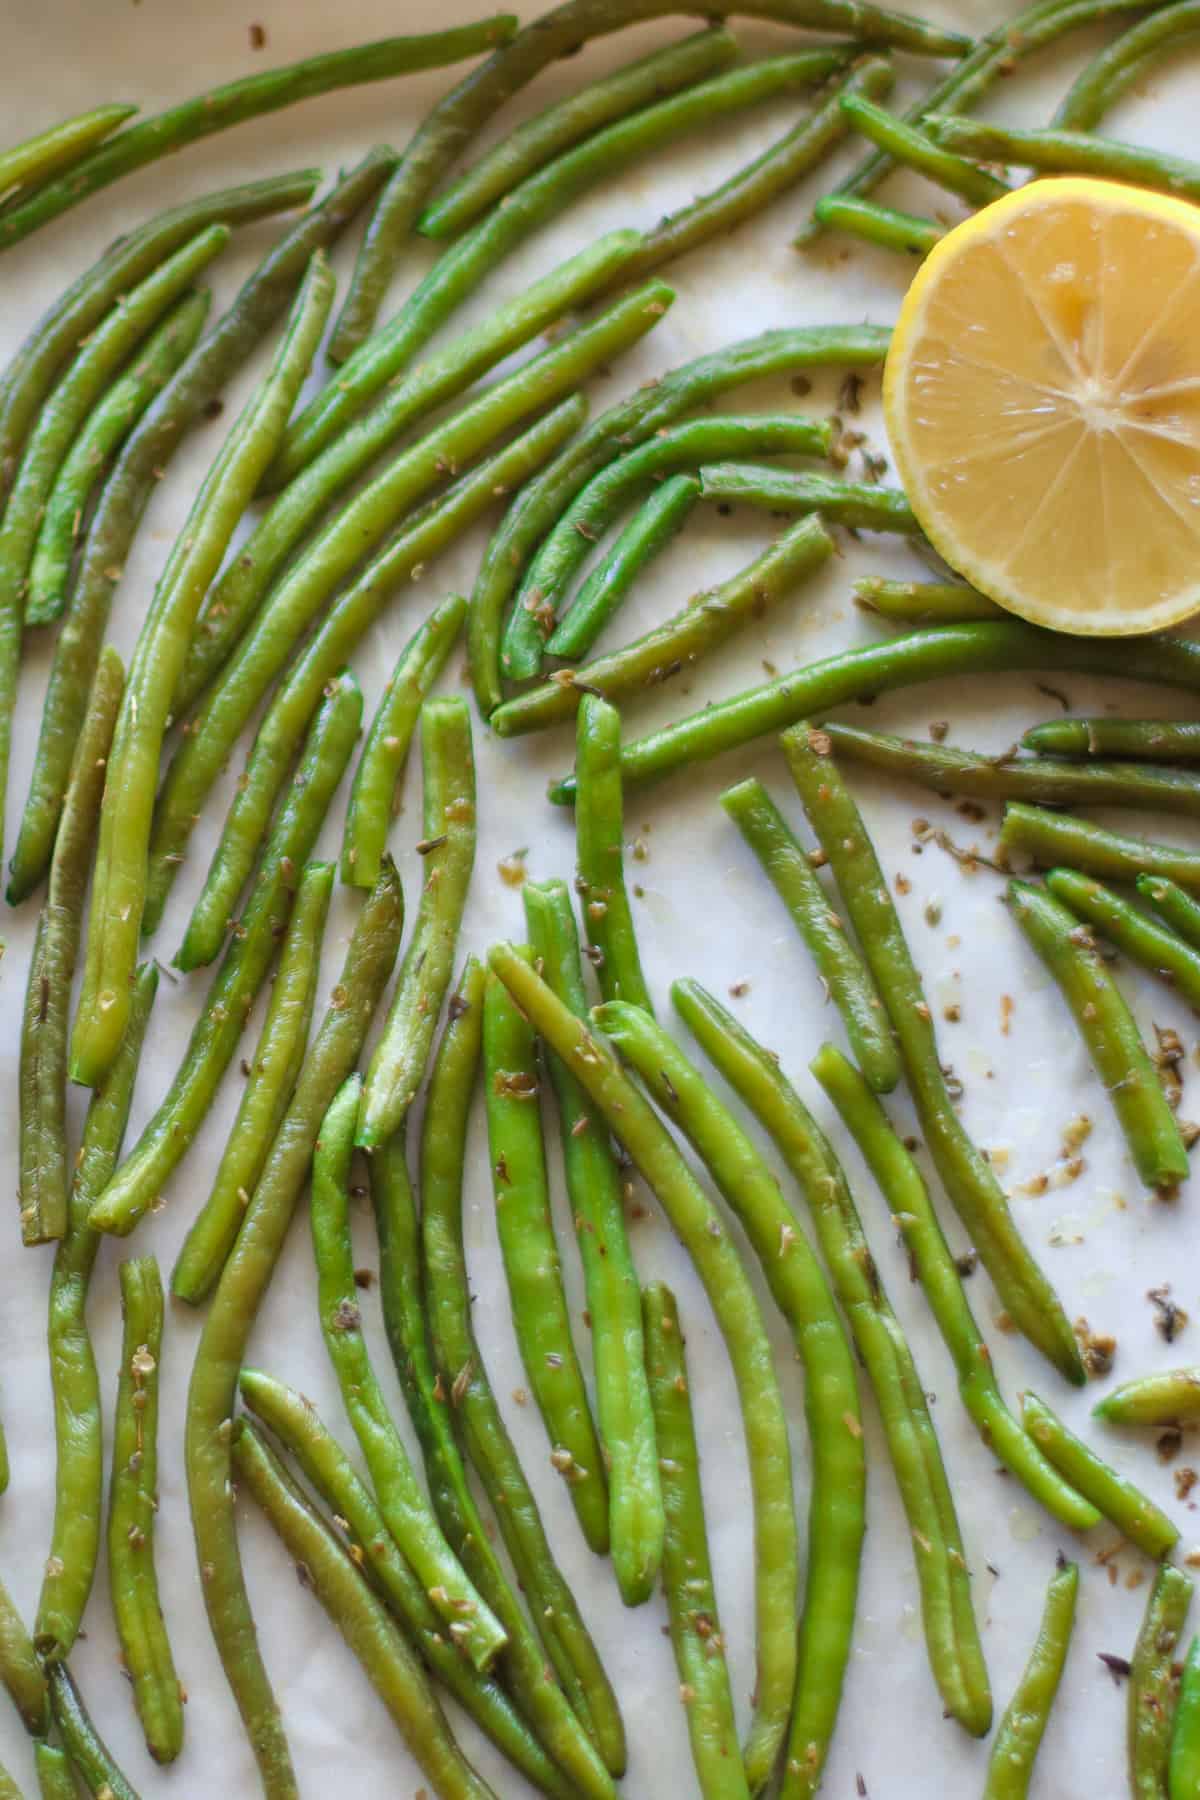 Roasted green beans on a baking sheet with a lemon slice.